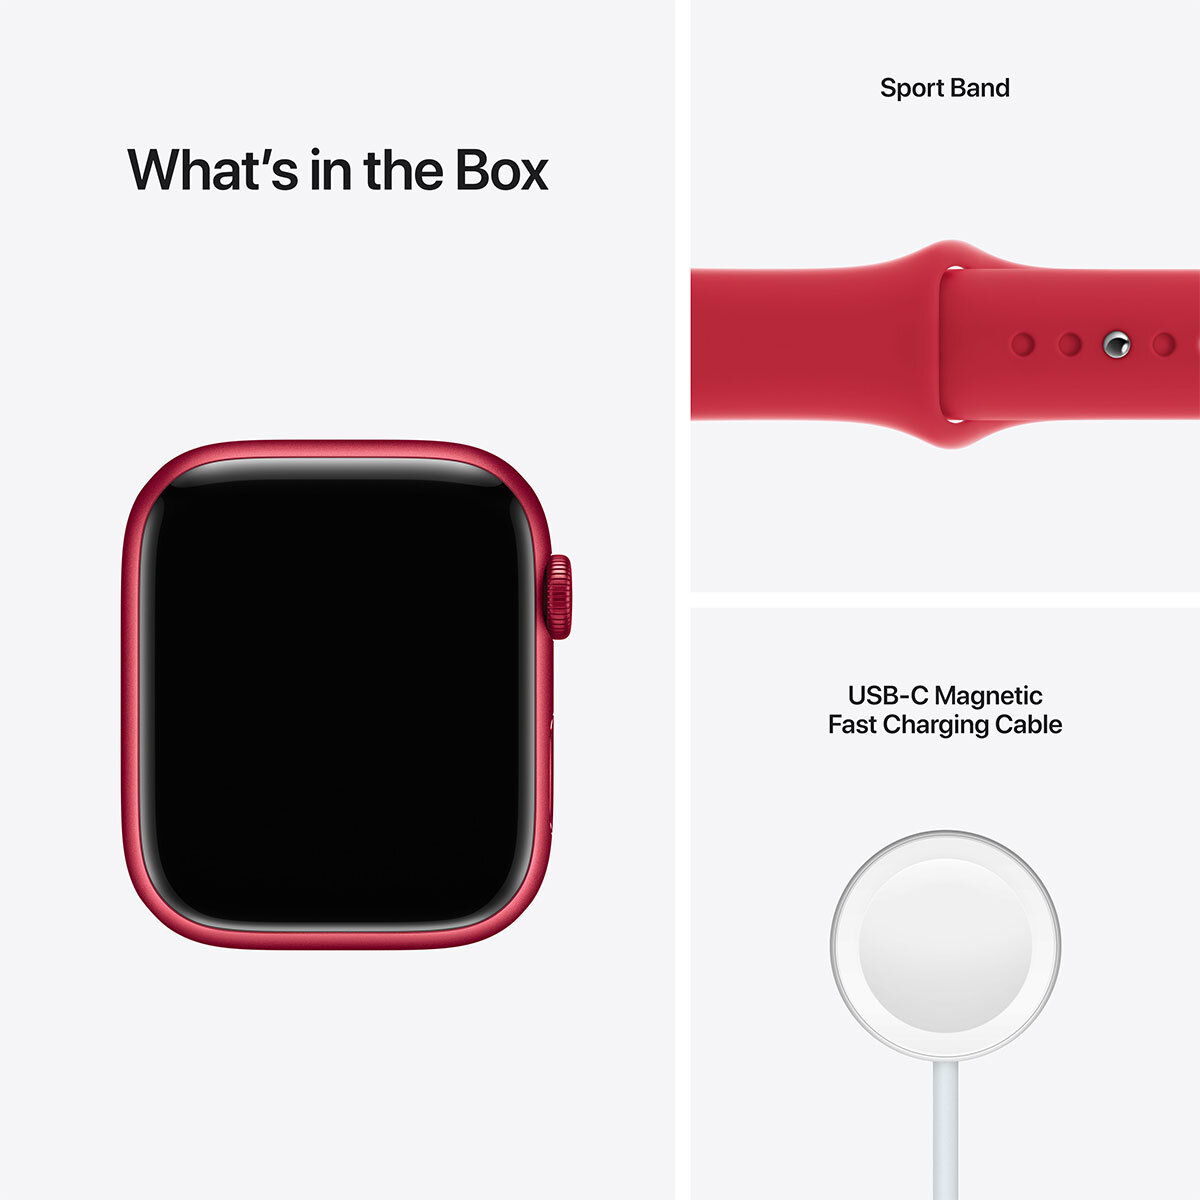 Buy Apple Watch Series 7 GPS, 45mm (PRODUCT)RED Aluminium Case with (PRODUCT)RED Sport Band, MKN93B/A at costco.co.uk